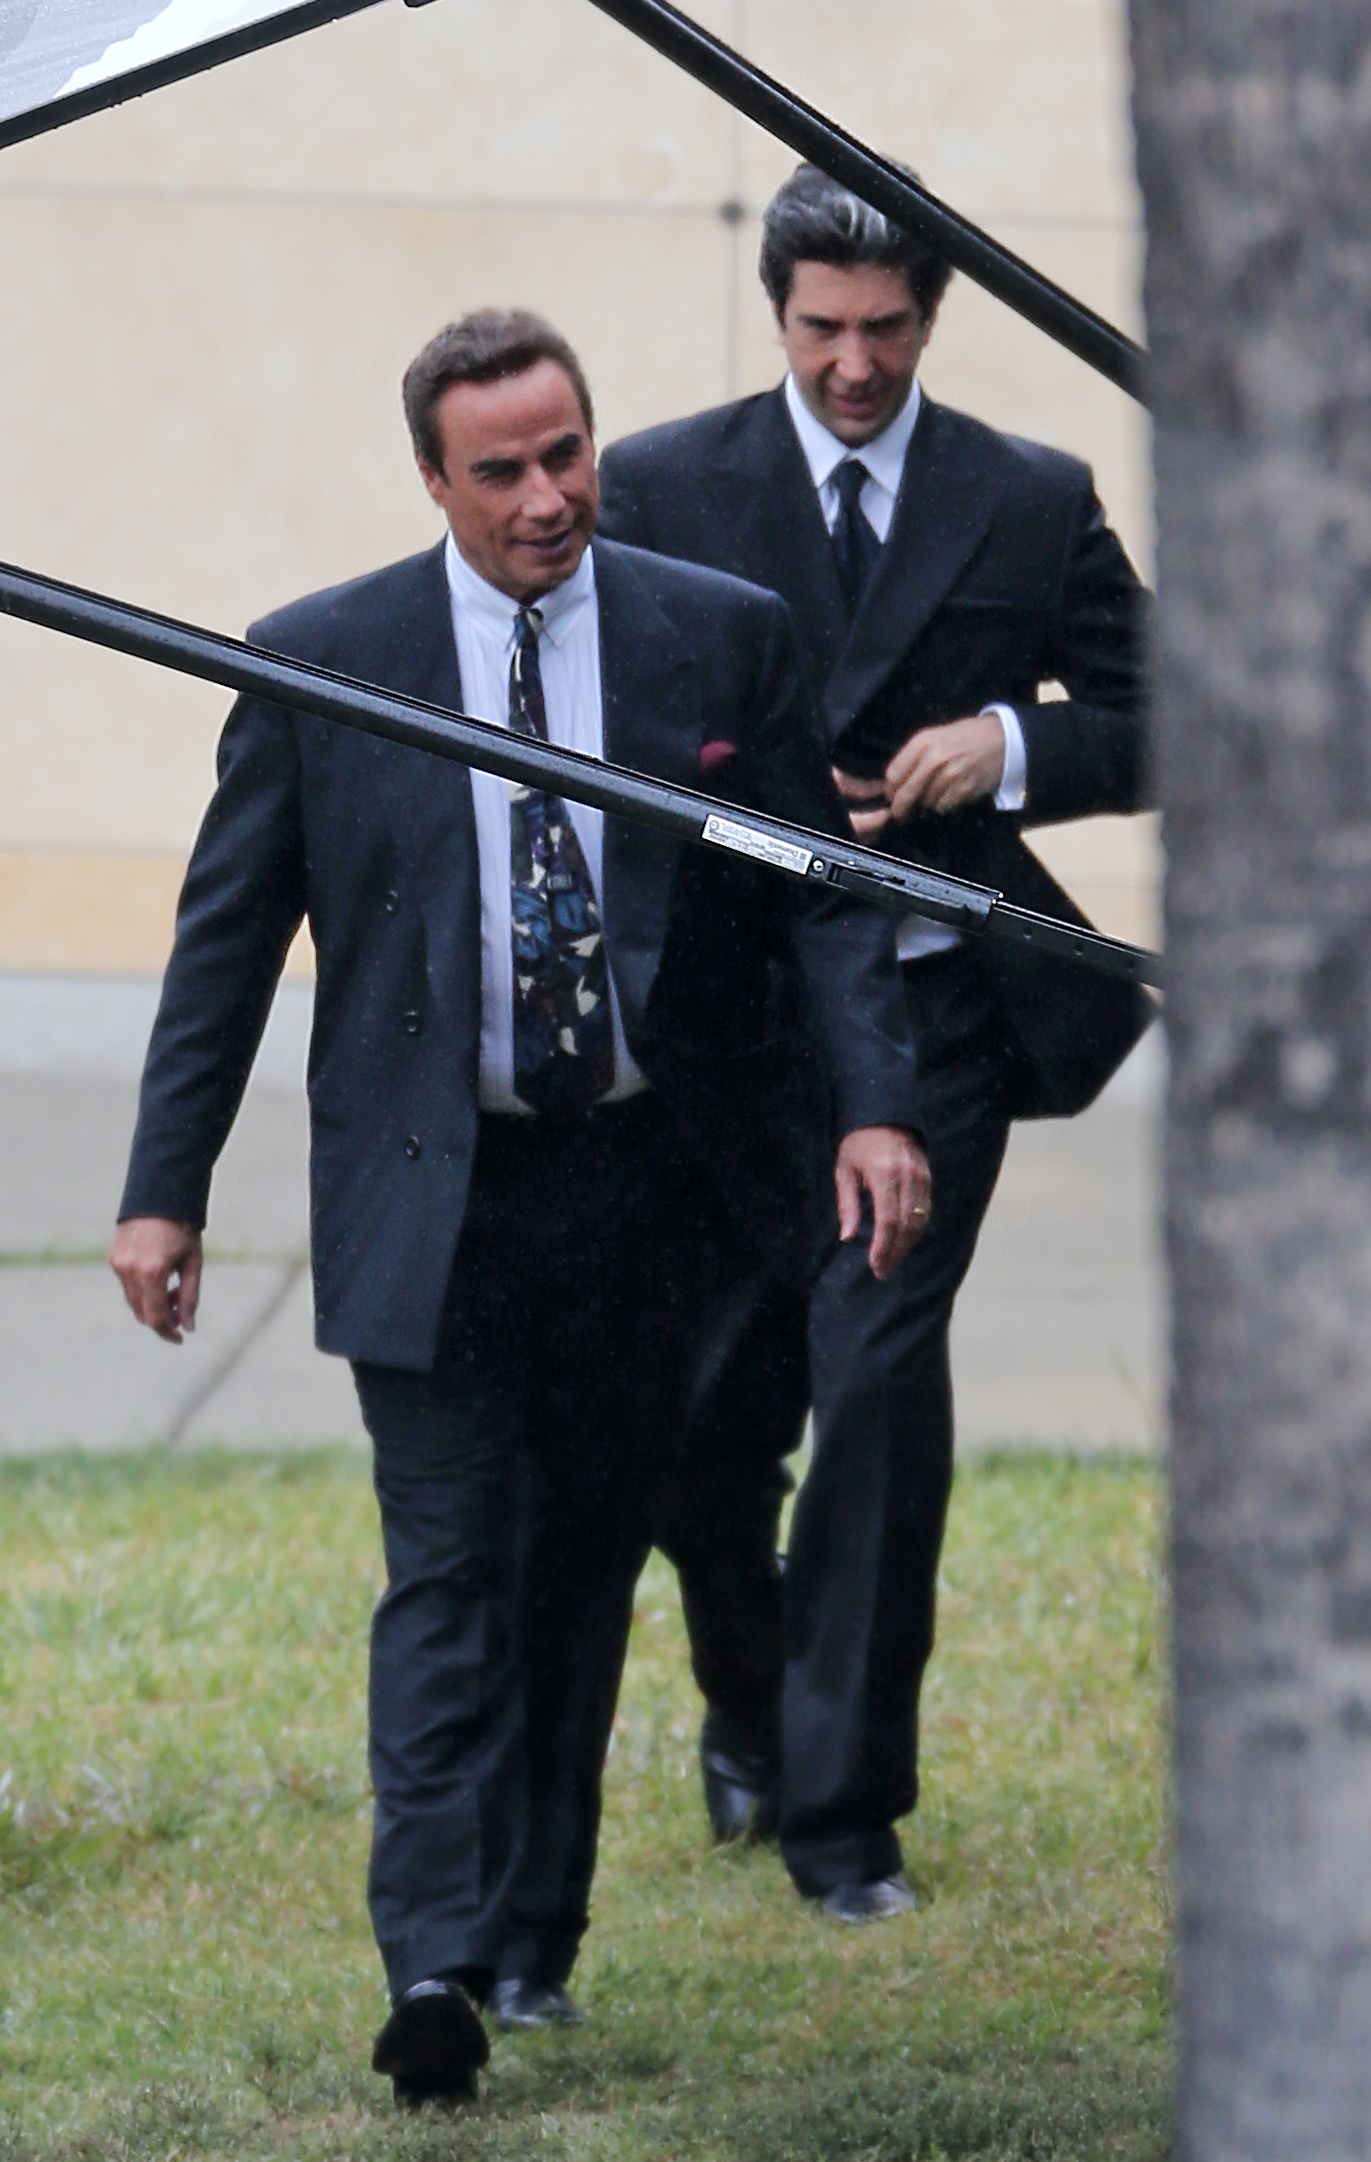 PHOTO: John Travolta and David Schwimmer film "American Crime Story" together in Los Angeles, May 14, 2015.
